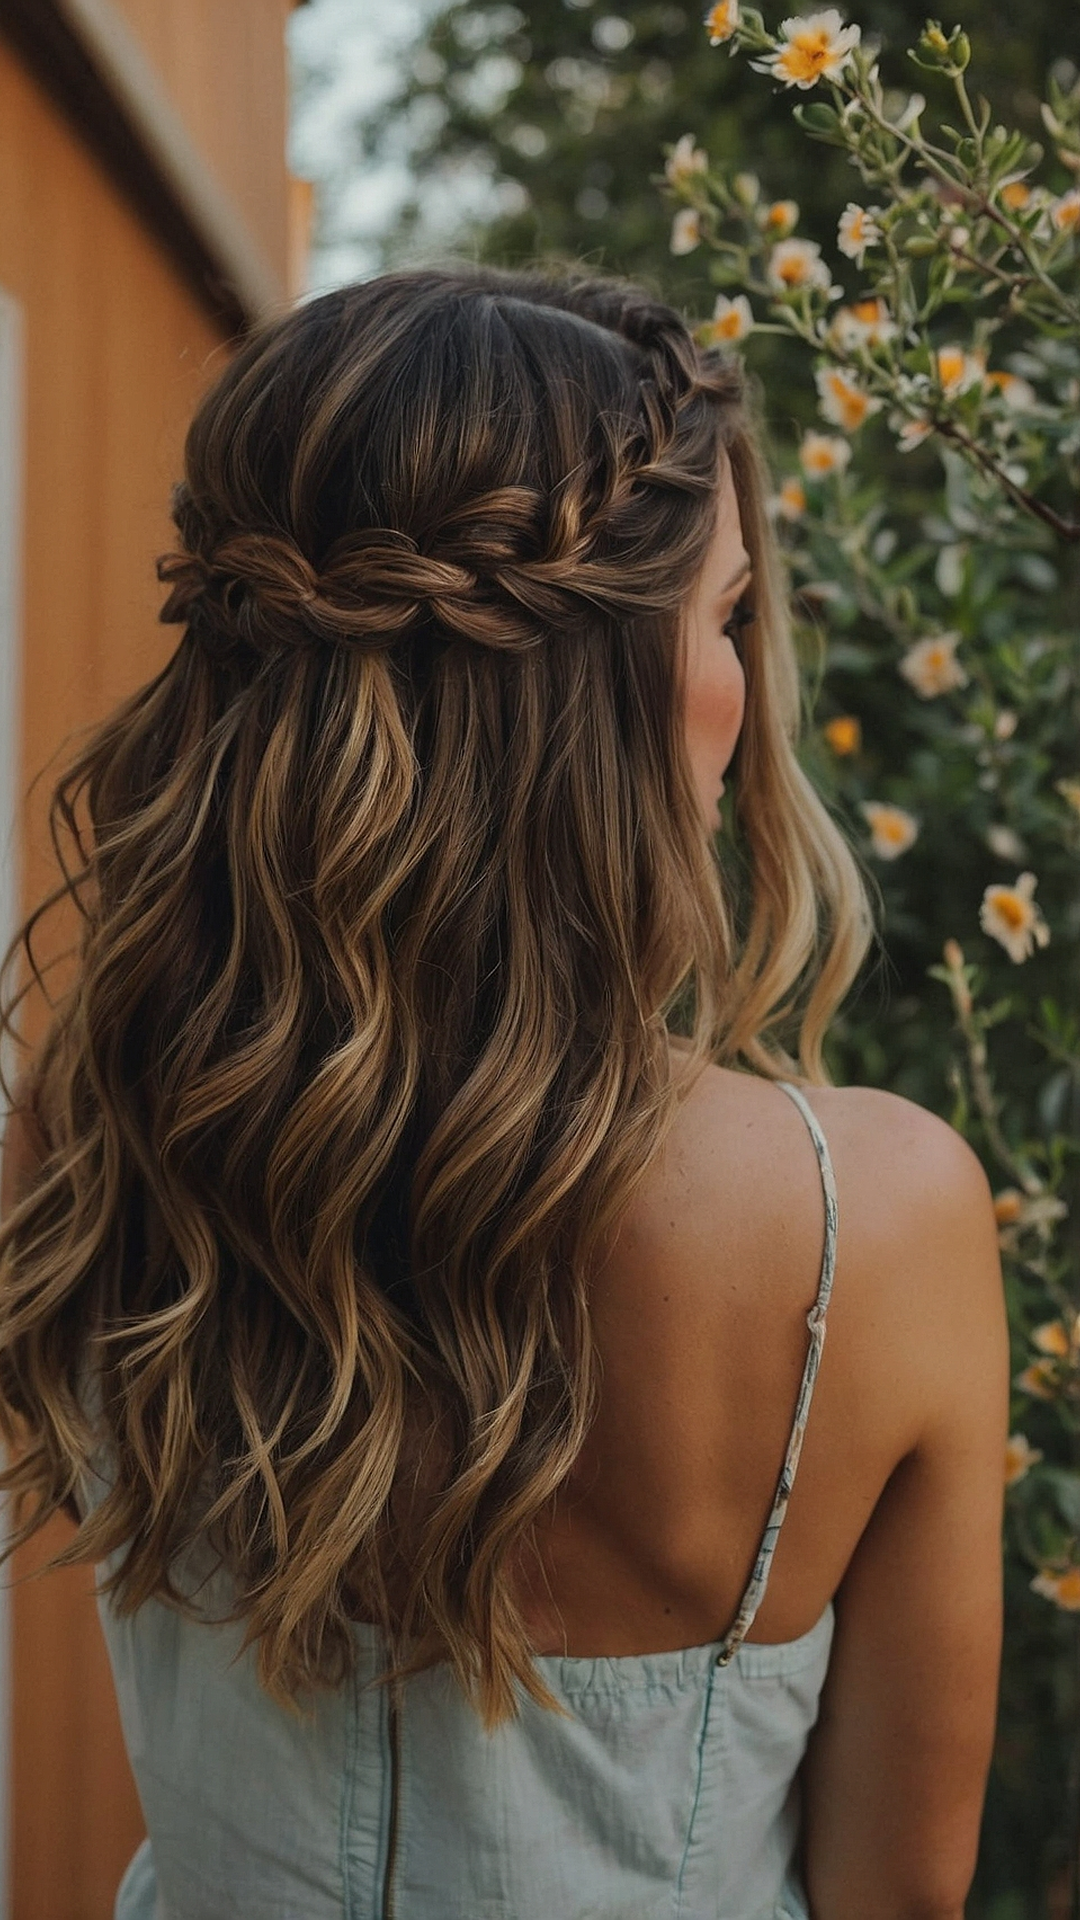 Sunny Strands: 15 Summer Hairstyles to Amp Up Your Look